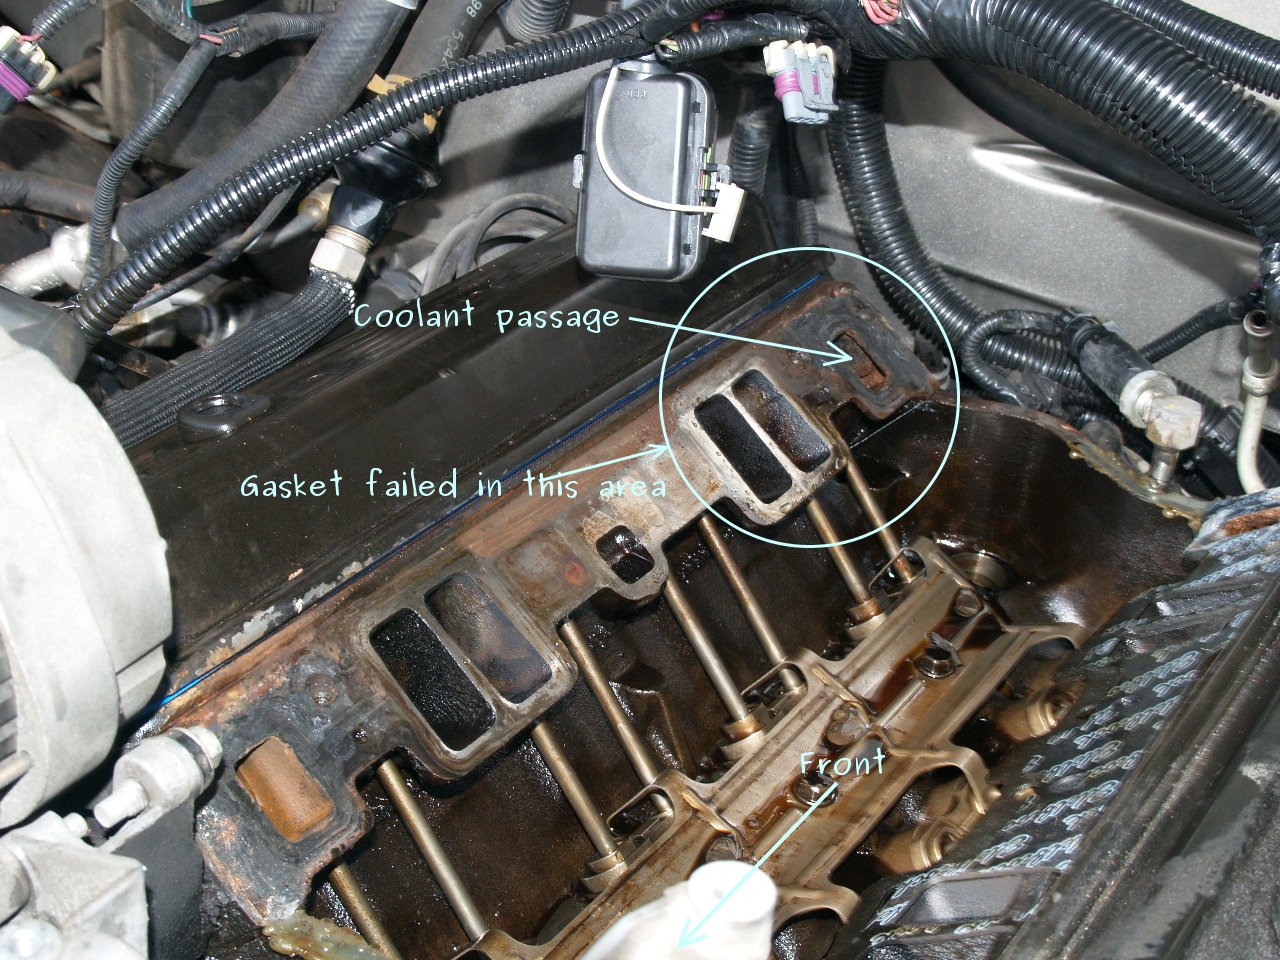 See P0363 in engine